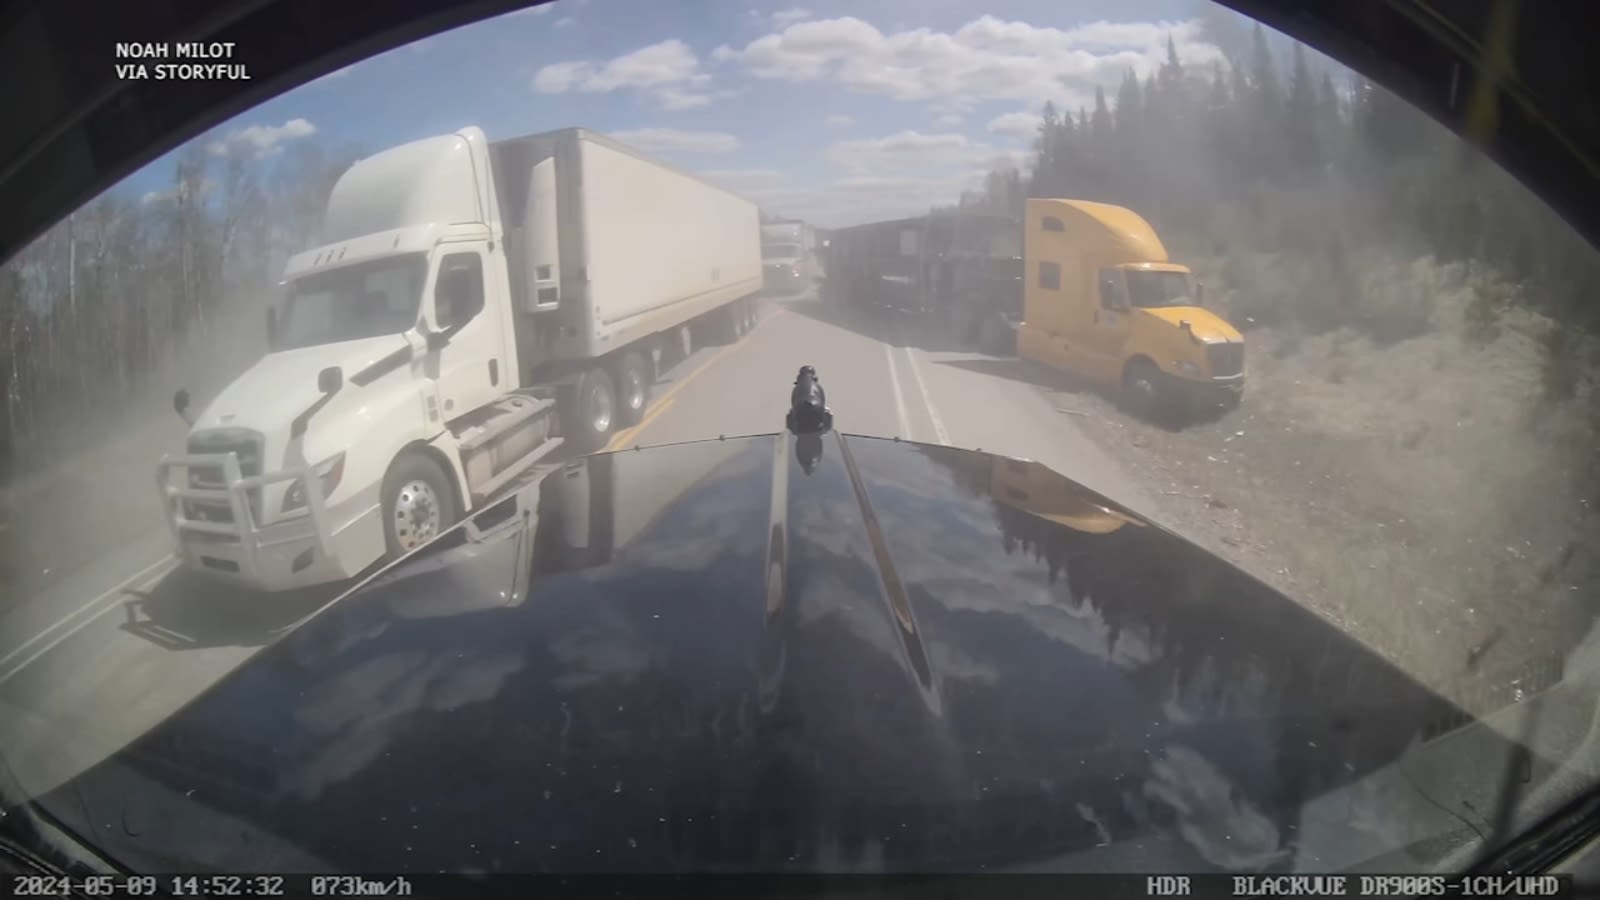 Canadian trucker narrowly avoids disaster crash, video shows: 'My life flashed in front of my eyes'